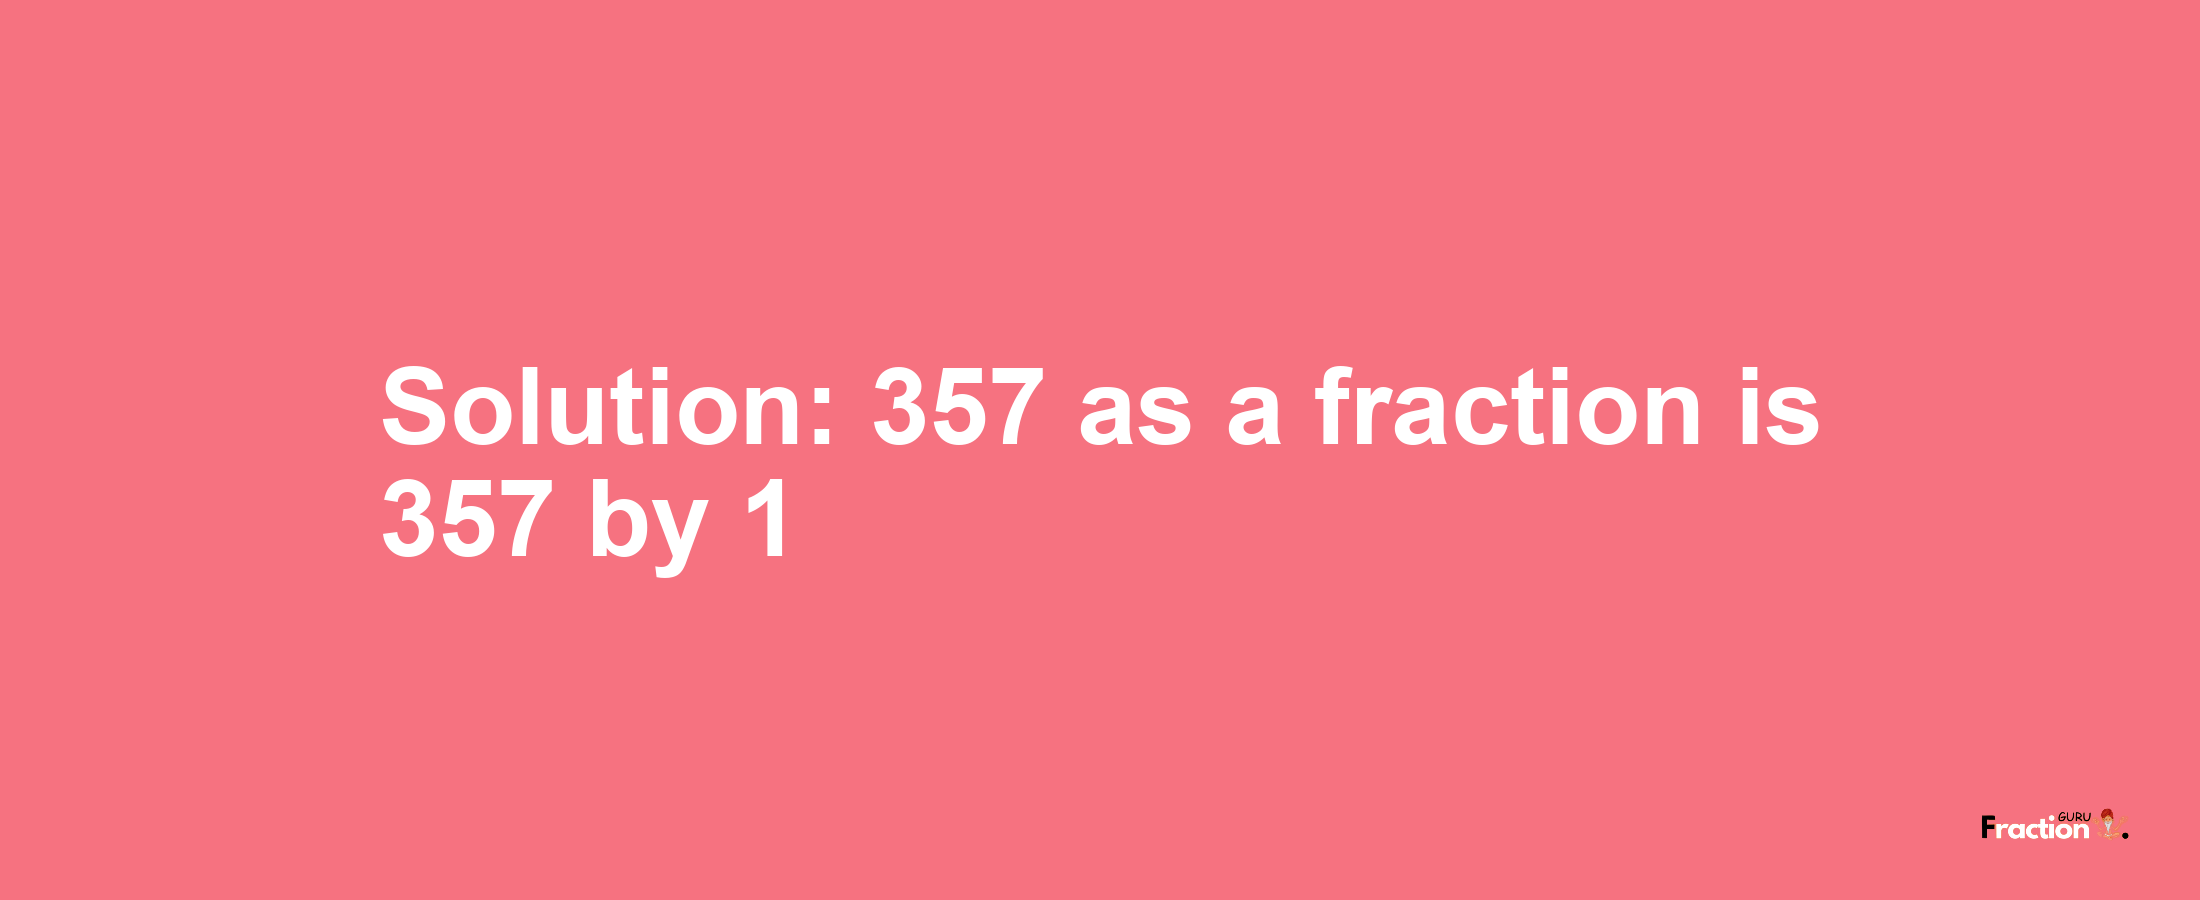 Solution:357 as a fraction is 357/1